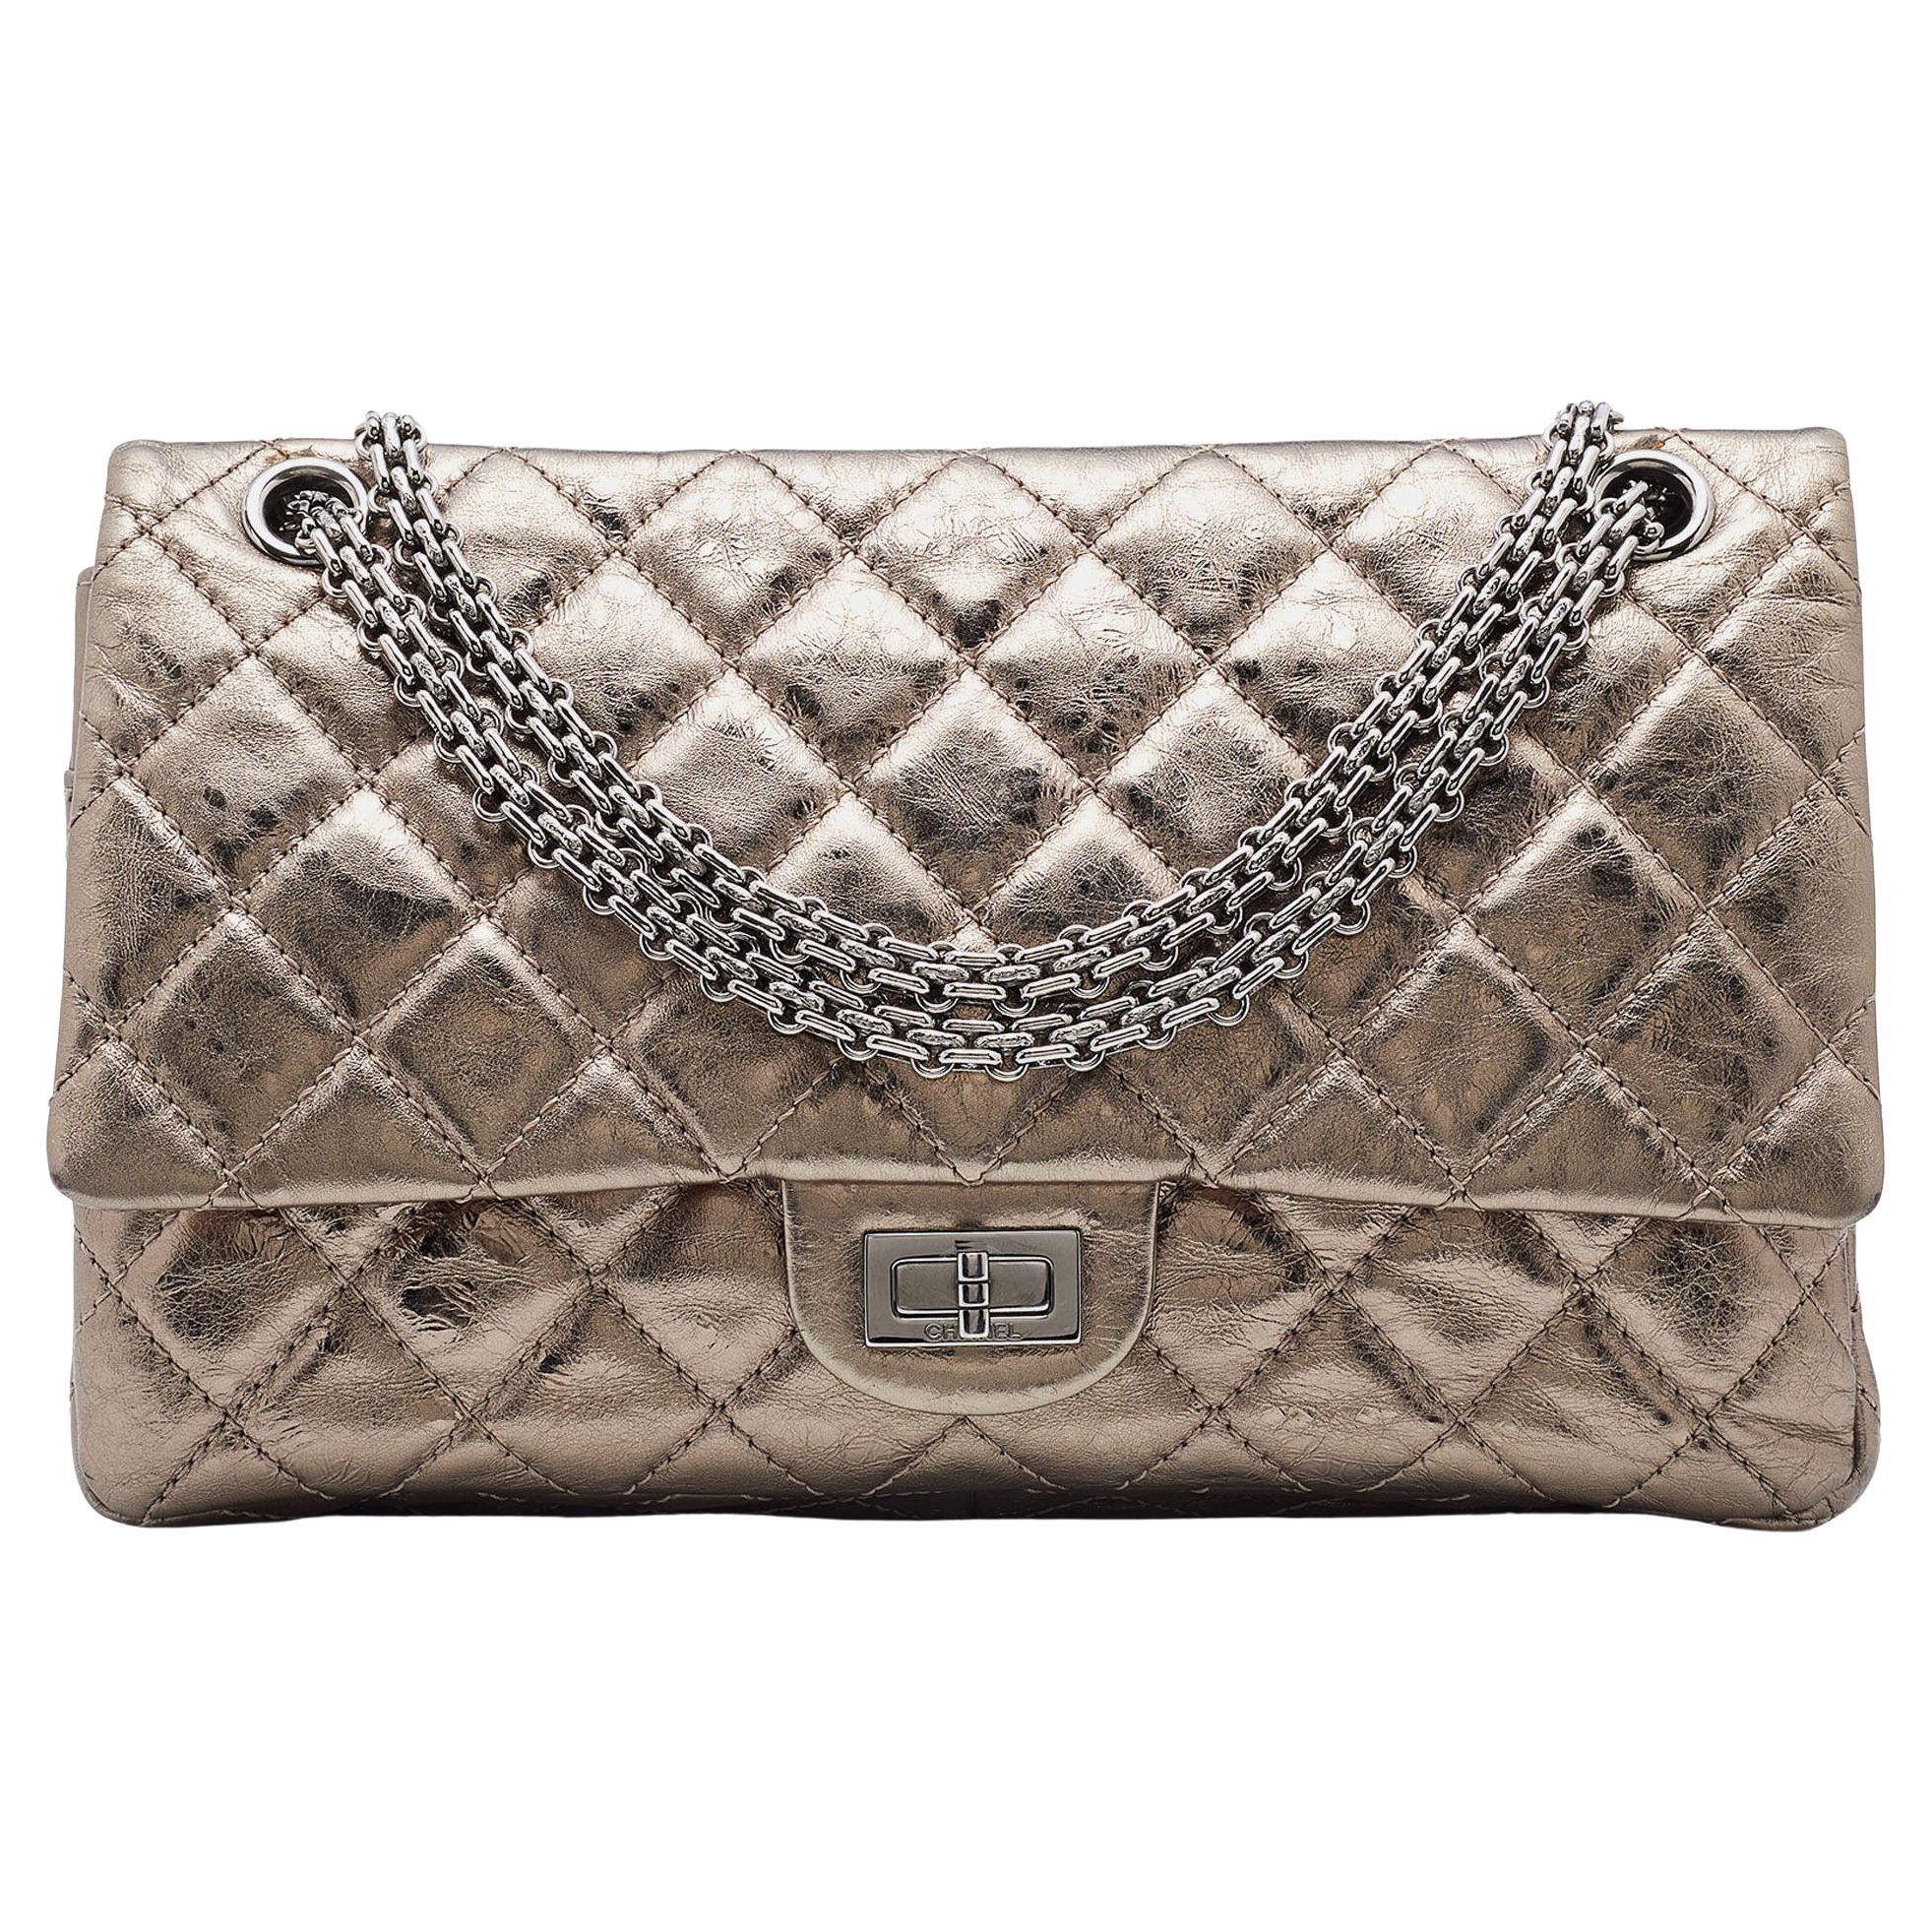 Chanel Metallic Quilted Aged Leather 226 Reissue 2.55 Flap Bag